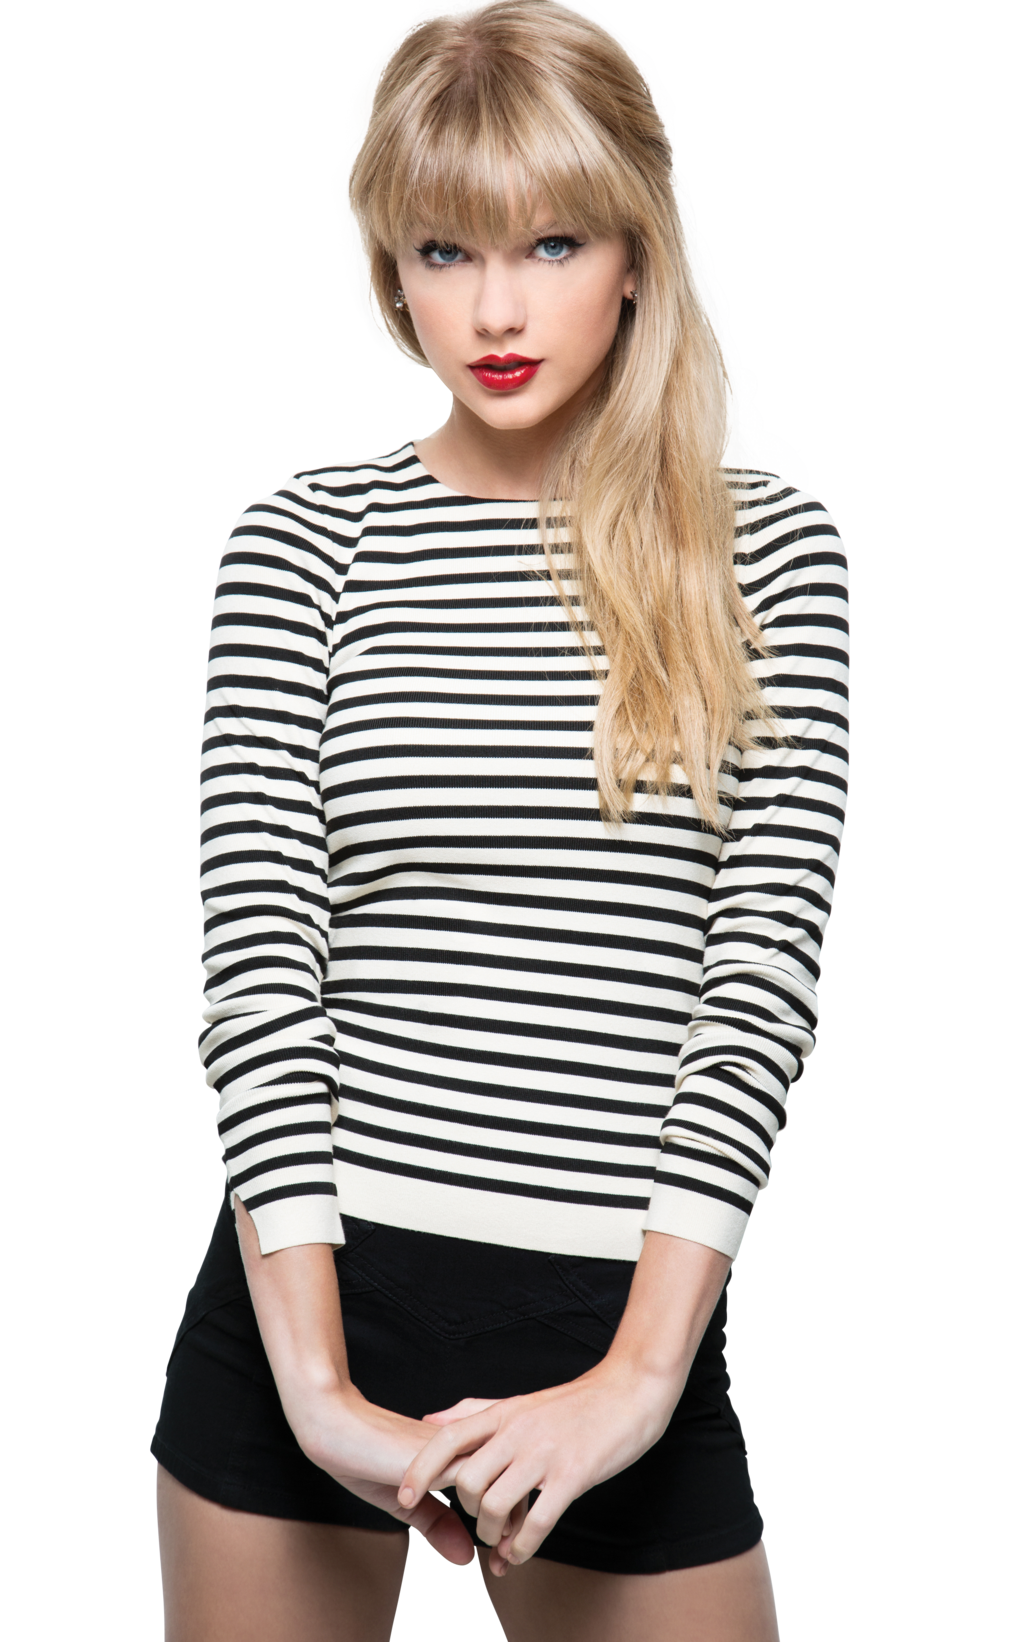 Taylor Swift Picture PNG Image